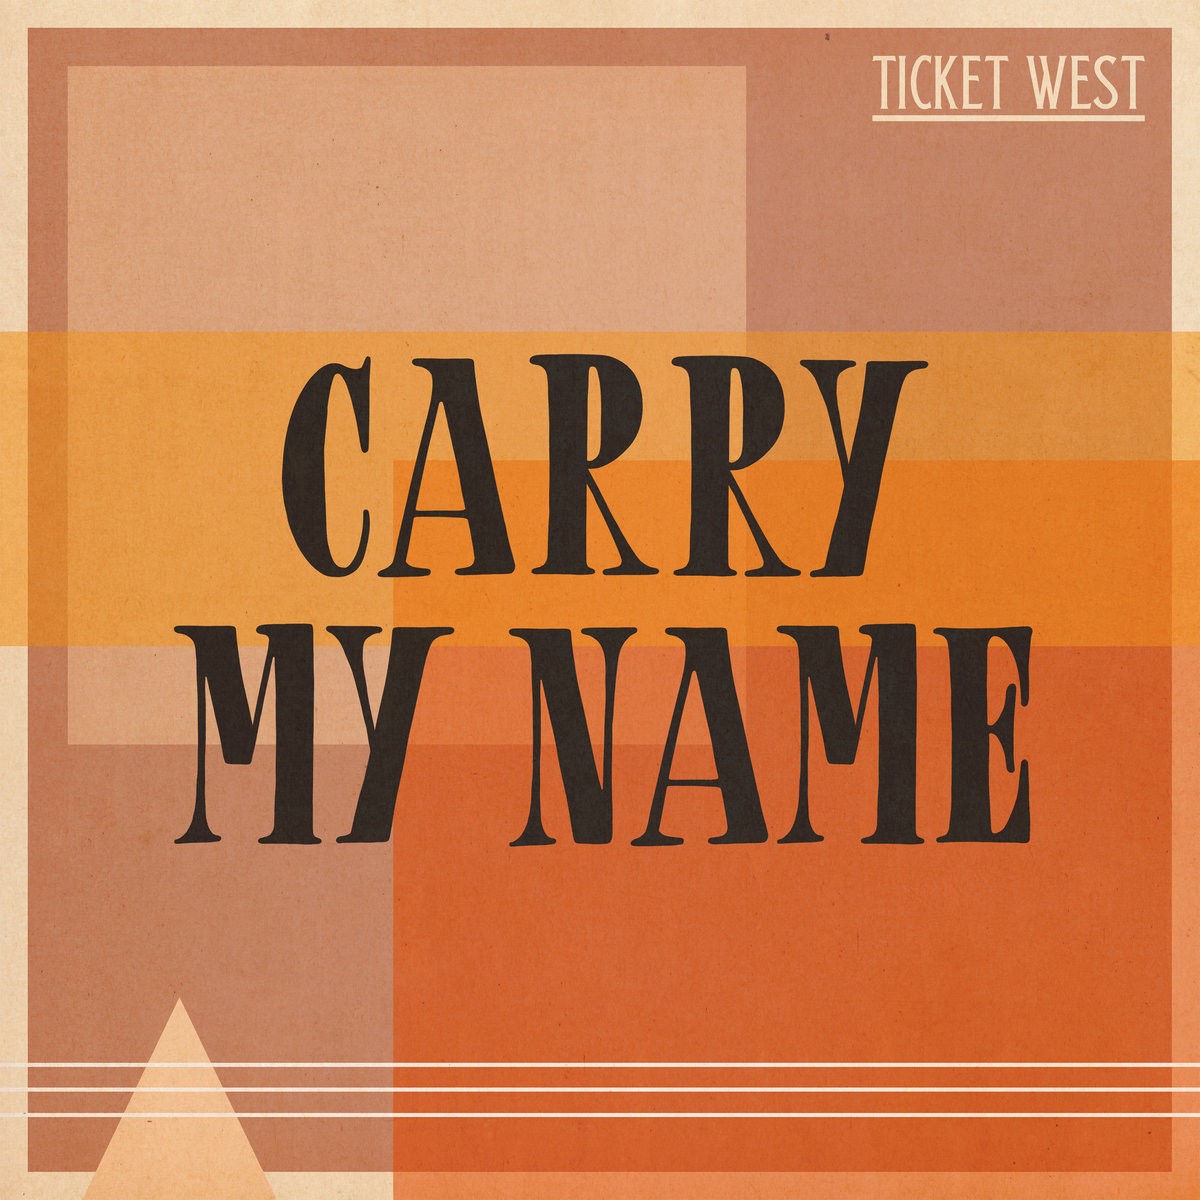 Ticket West - Carry My Name